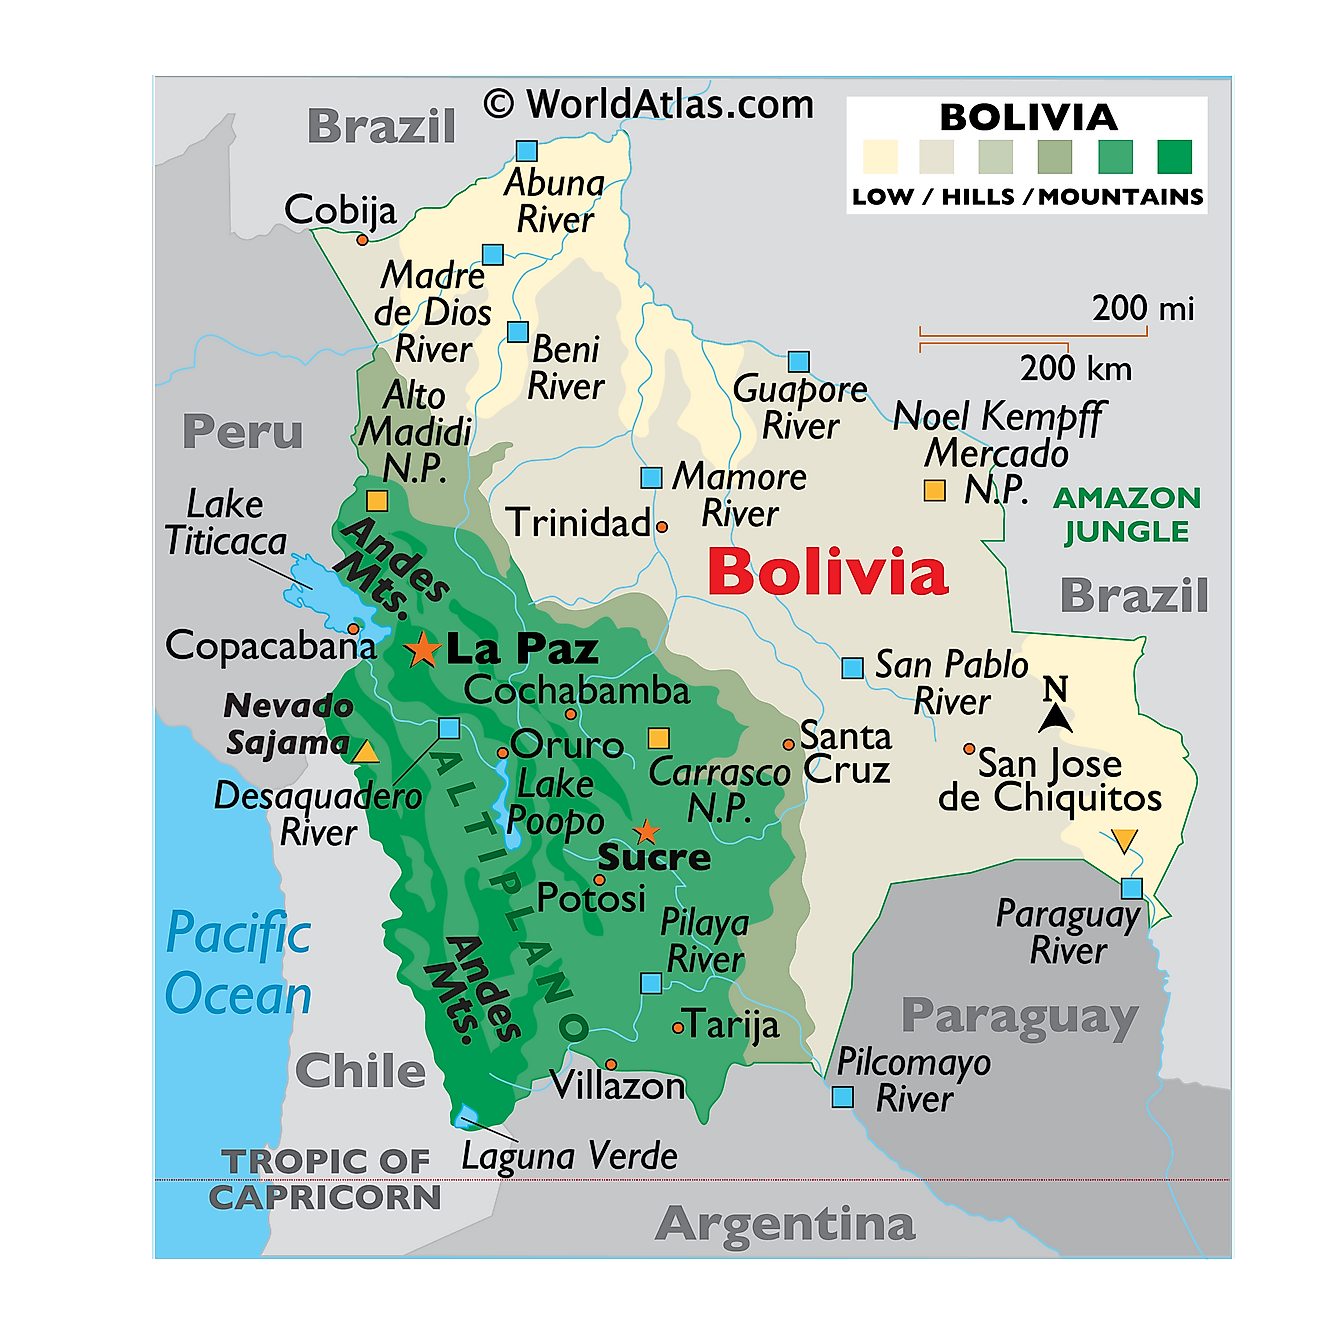 Physical Map of Bolivia showing relief, rivers, mountains ranges, major lakes, important cities, bordering countries, and more.